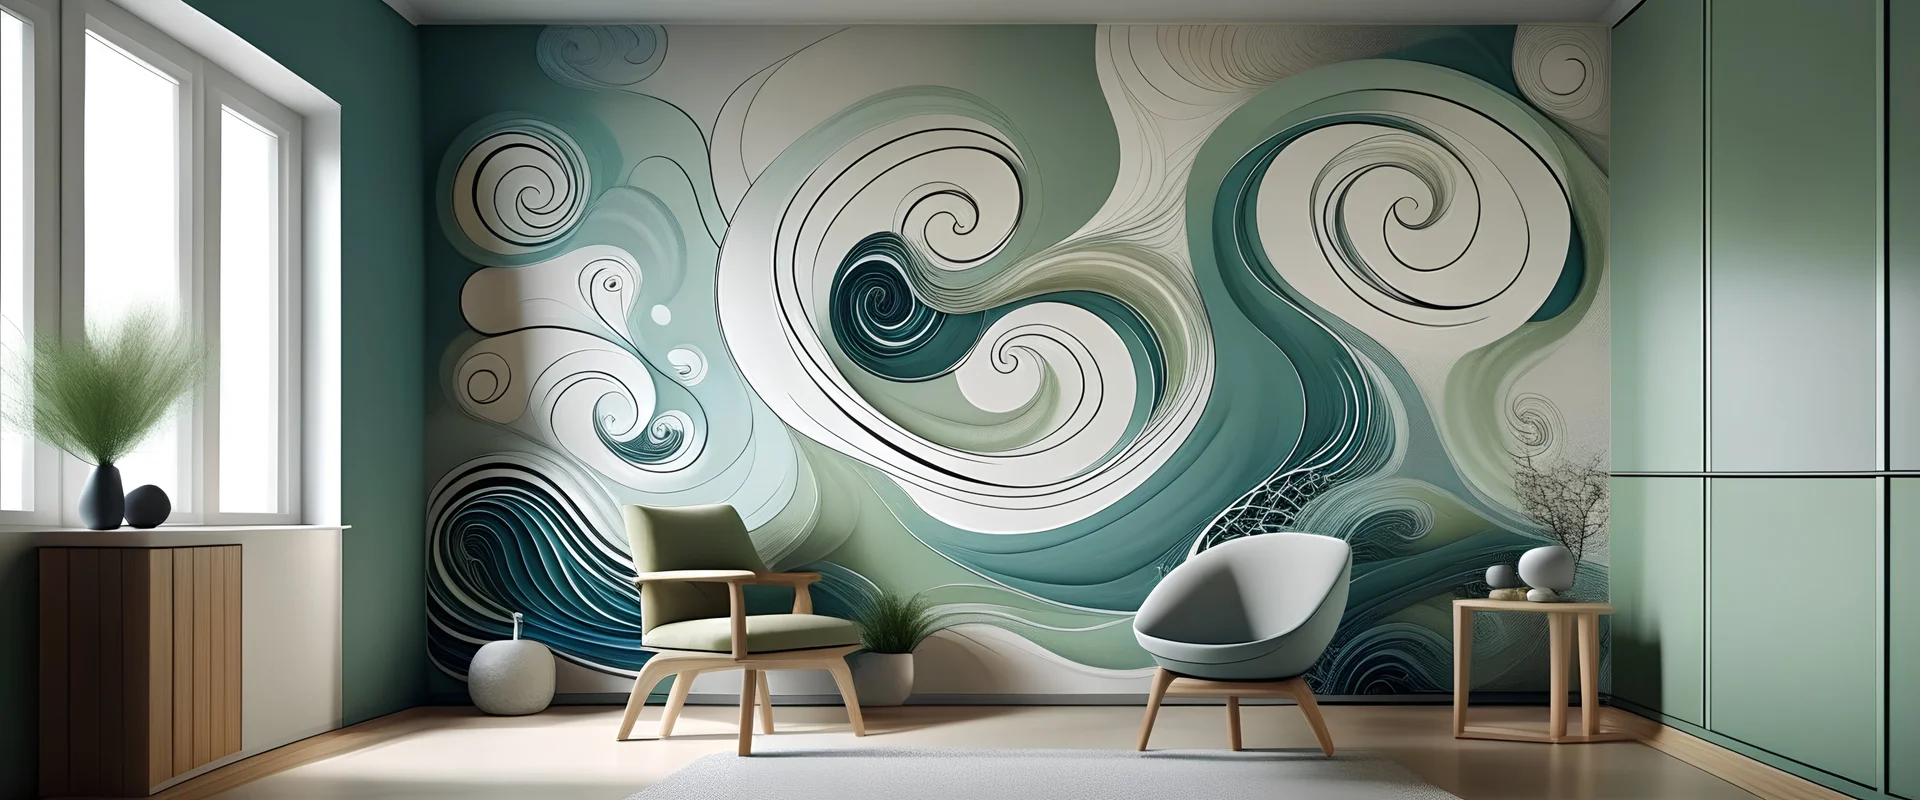 Create a mural with organic swirls and curves, instilling a sense of serenity and calmness in the space.